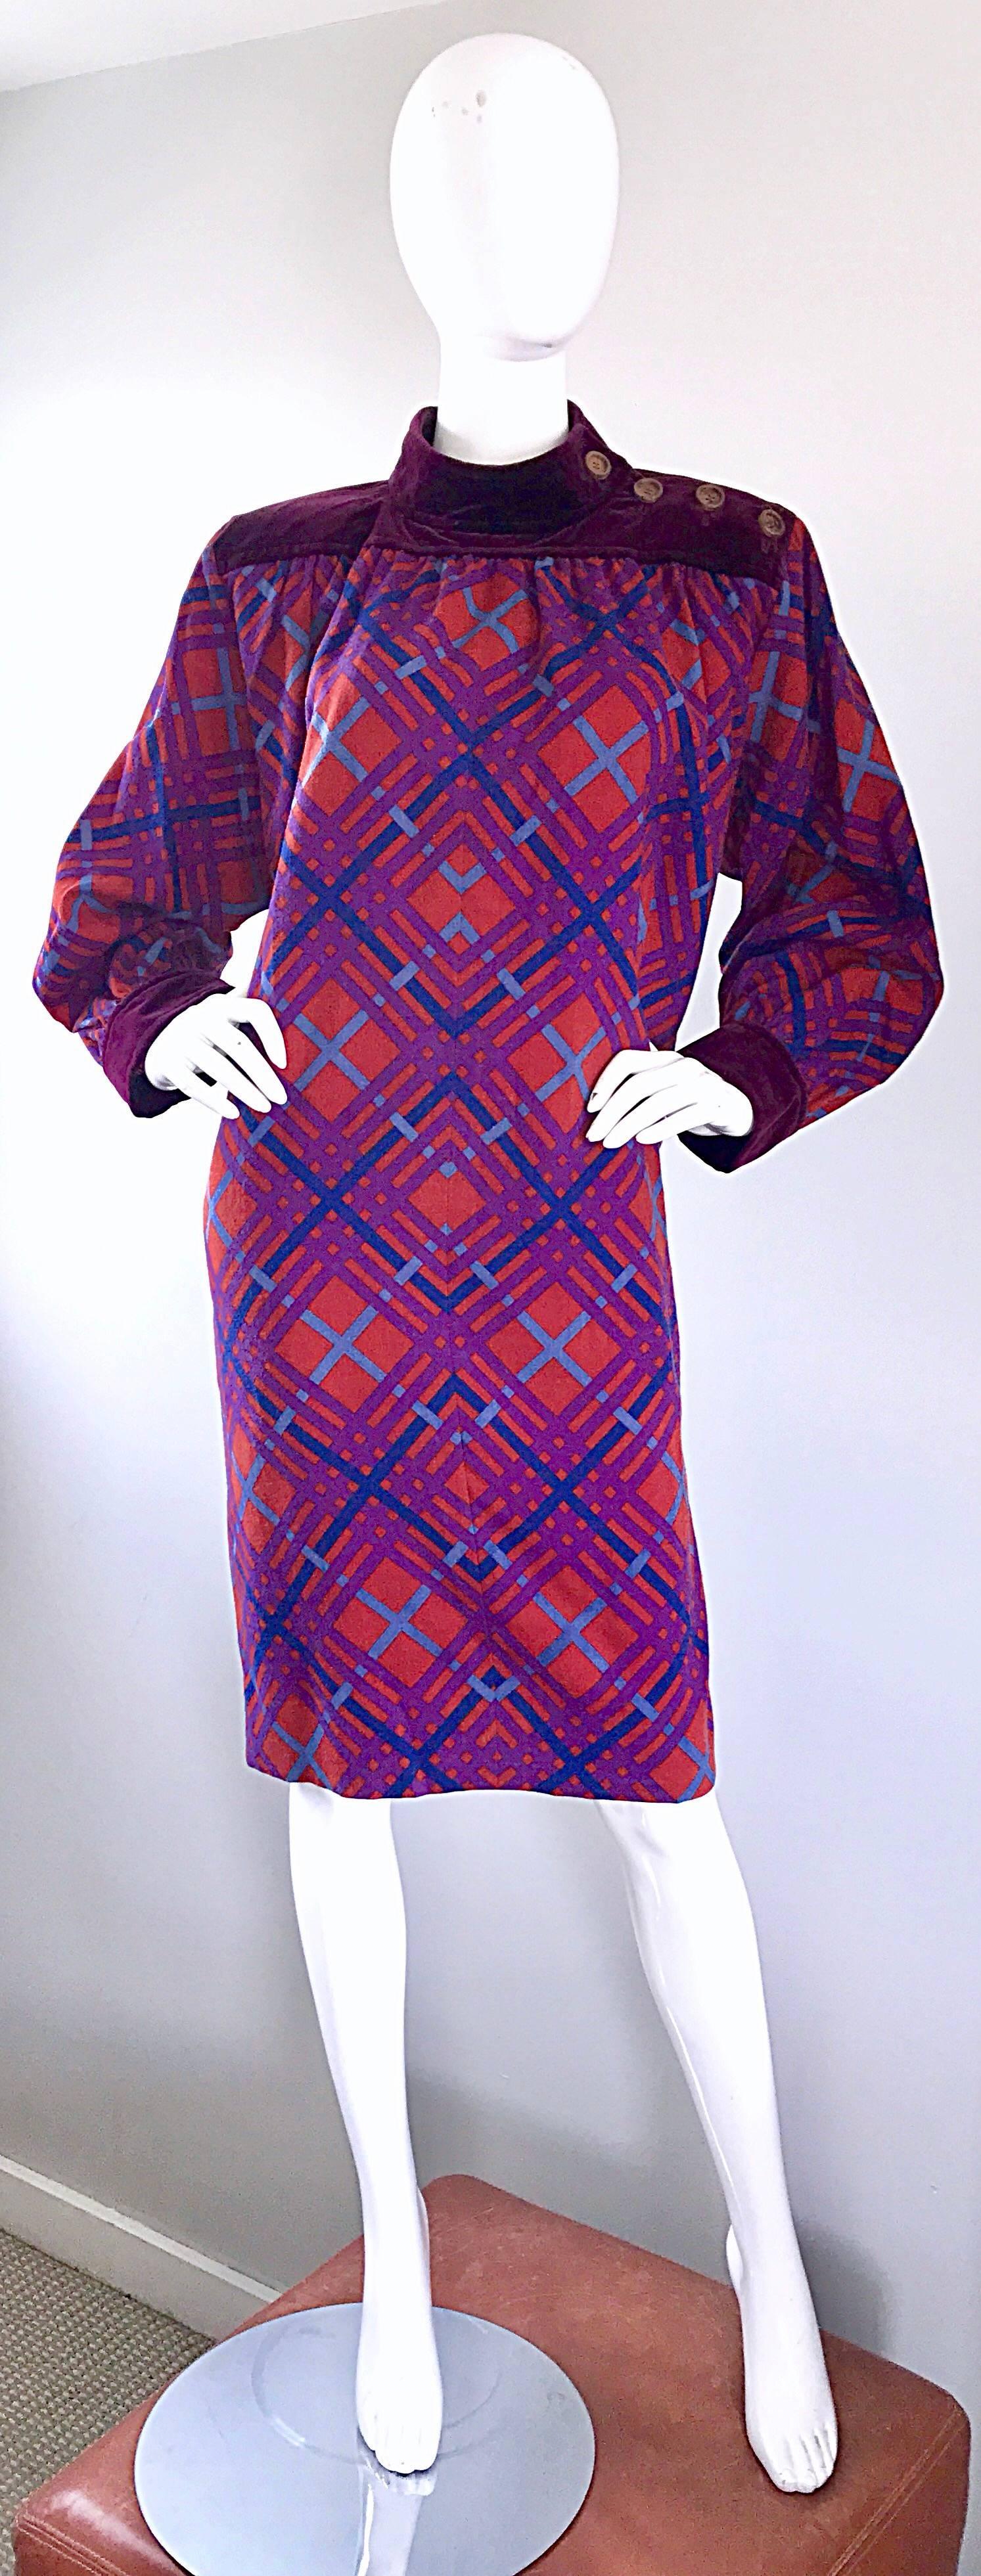 Rare and iconic vintage YVES SAINT LAURENT 'Rive Gauche' Russian Collection dress! The 1976 RUssian Collection is Saint Laurent's most iconic collection of all time, and is referenced often. This beauty features a sot virgin wool body, w/ burgundy